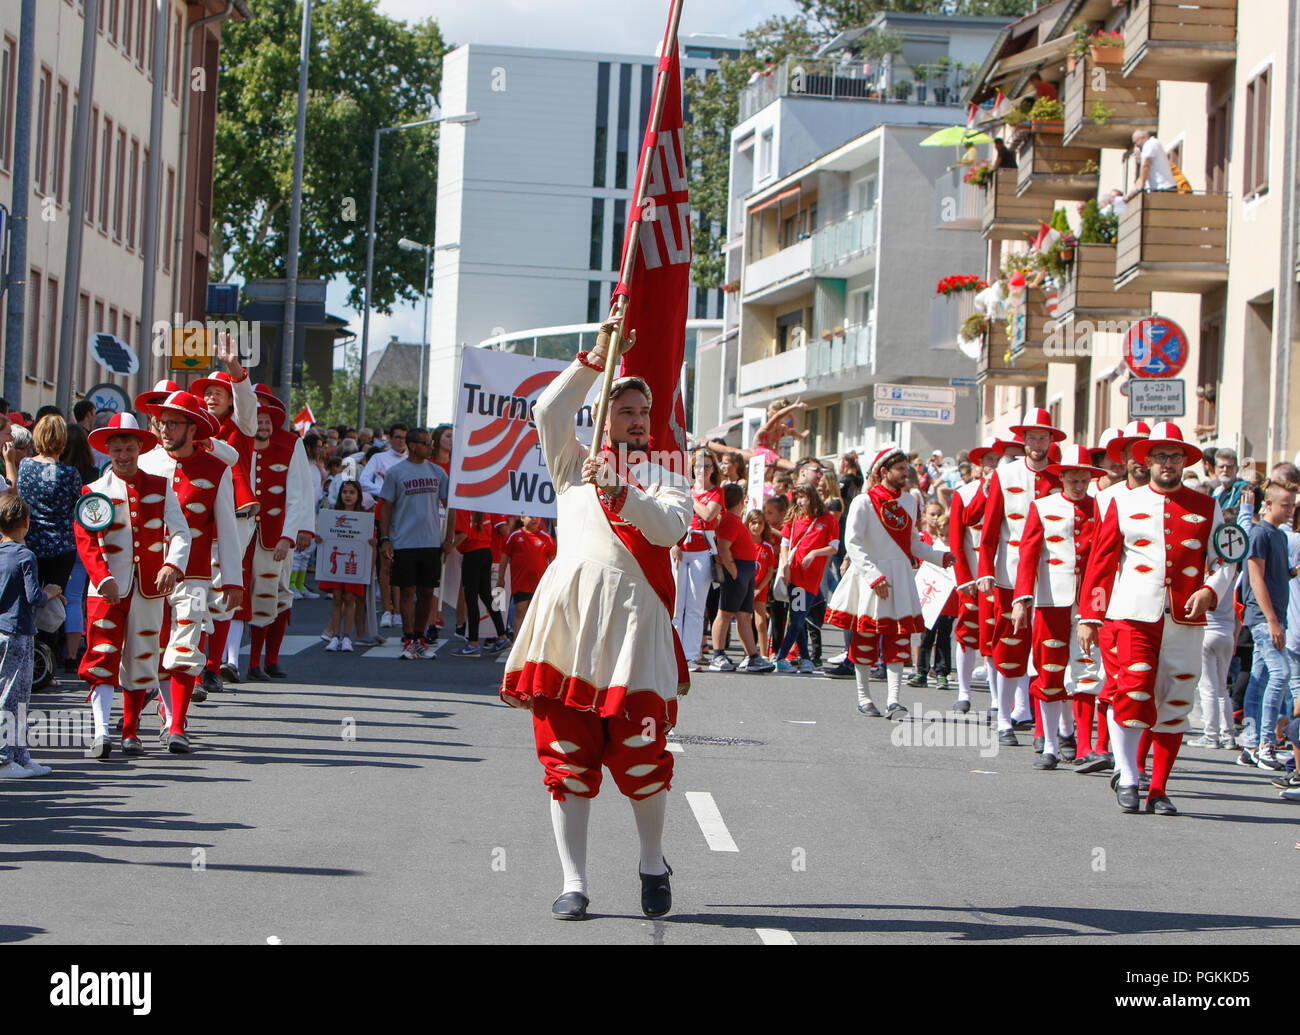 Worms, Germany. 26th Aug, 2018. Journeymen march in the parade in traditional costume. The first highlight of the 2018 Backfischfest was the big parade through the city of Worms with over 70 groups and floats. Community groups, music groups and businesses from Worms and further afield took part. Credit: Michael Debets/Pacific Press/Alamy Live News Stock Photo